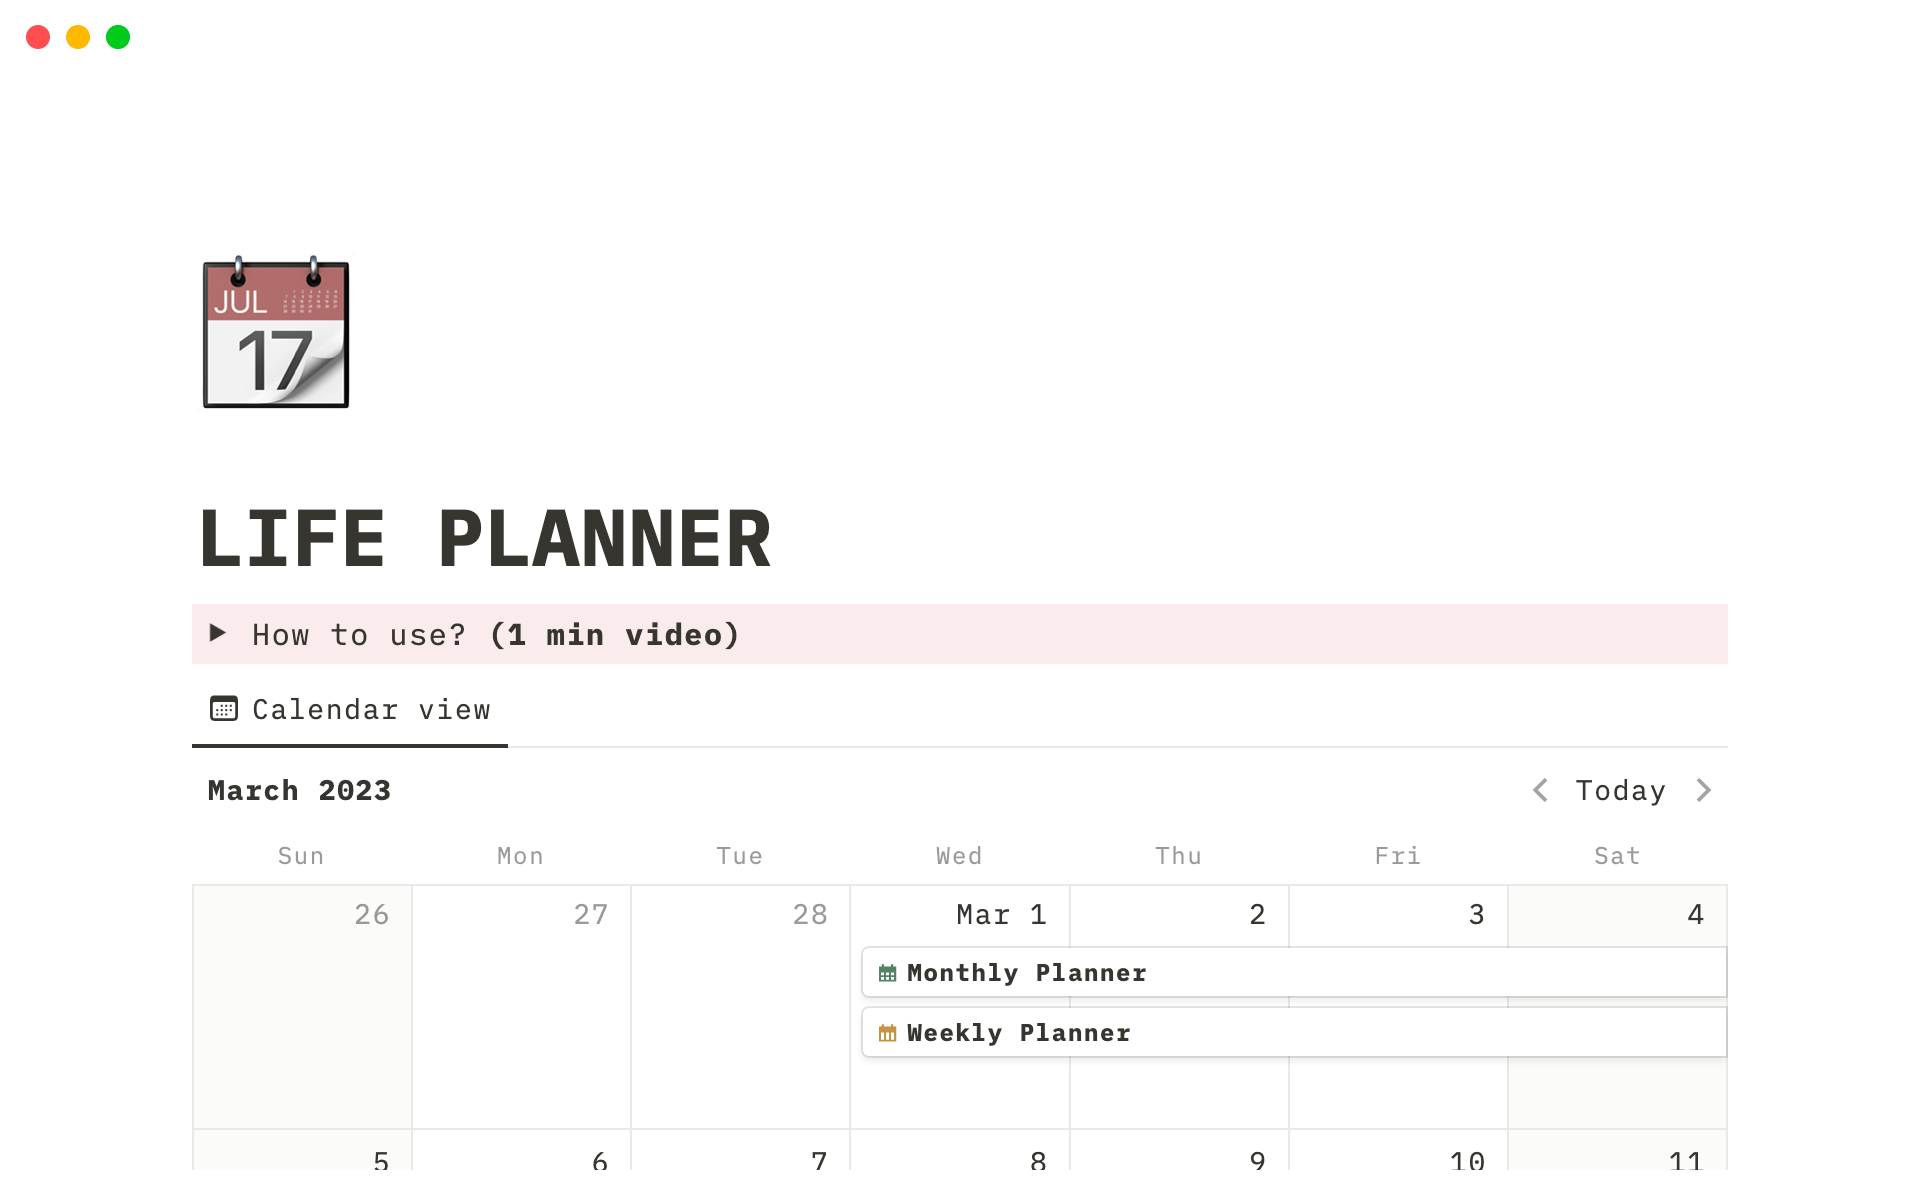 Life Planner pack has three templates that are designed to help anyone plan their life for the future.